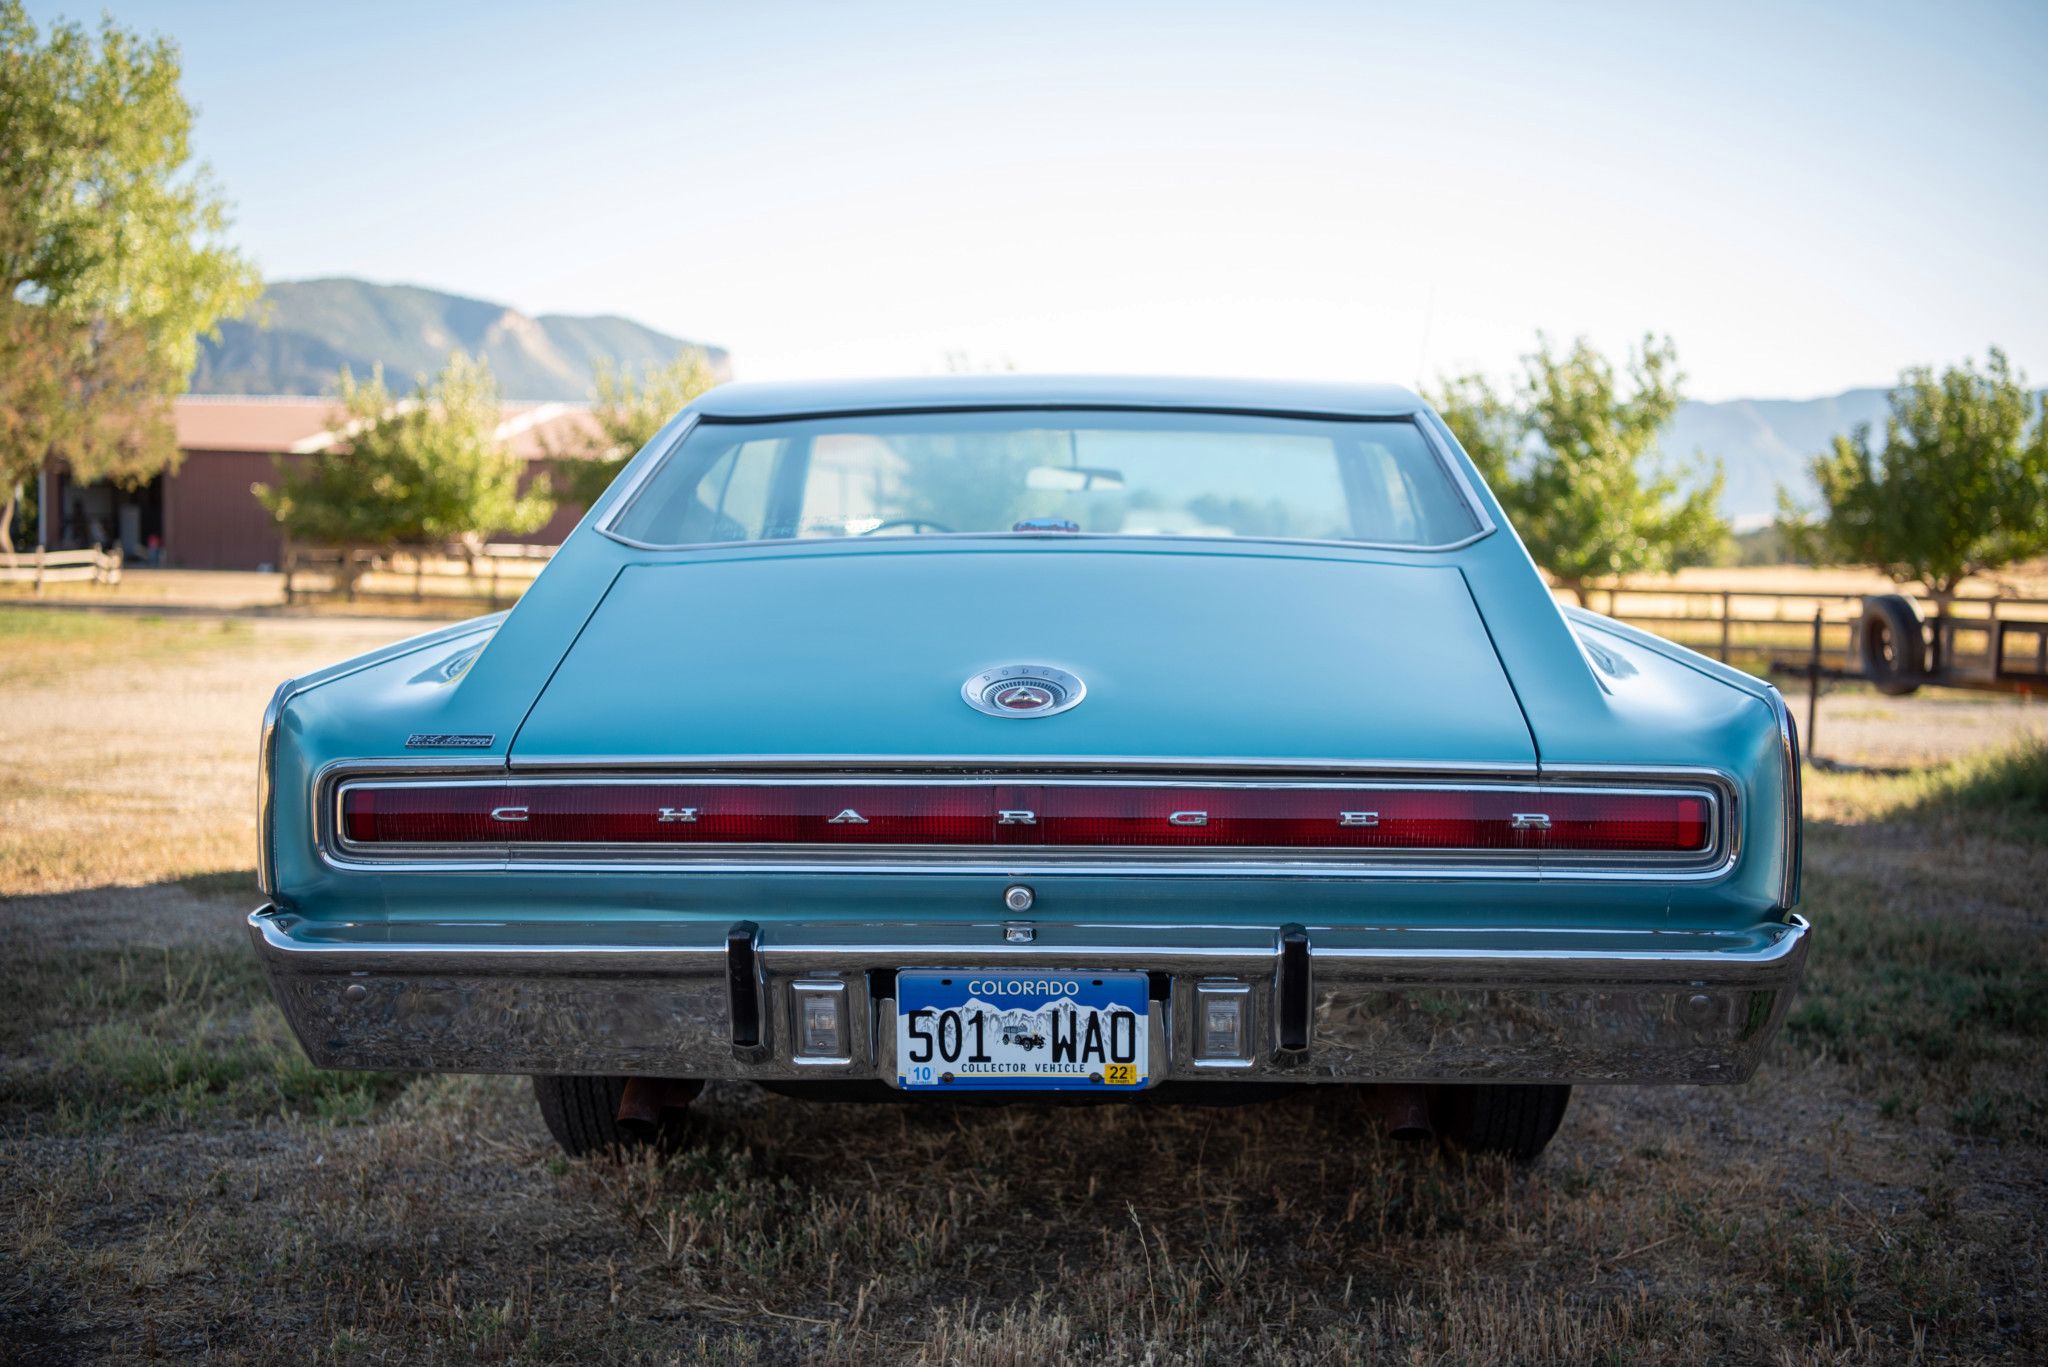 Here's how much this 1967 Dodge Charger is worth, 426 R/T 440 Magnum 1966